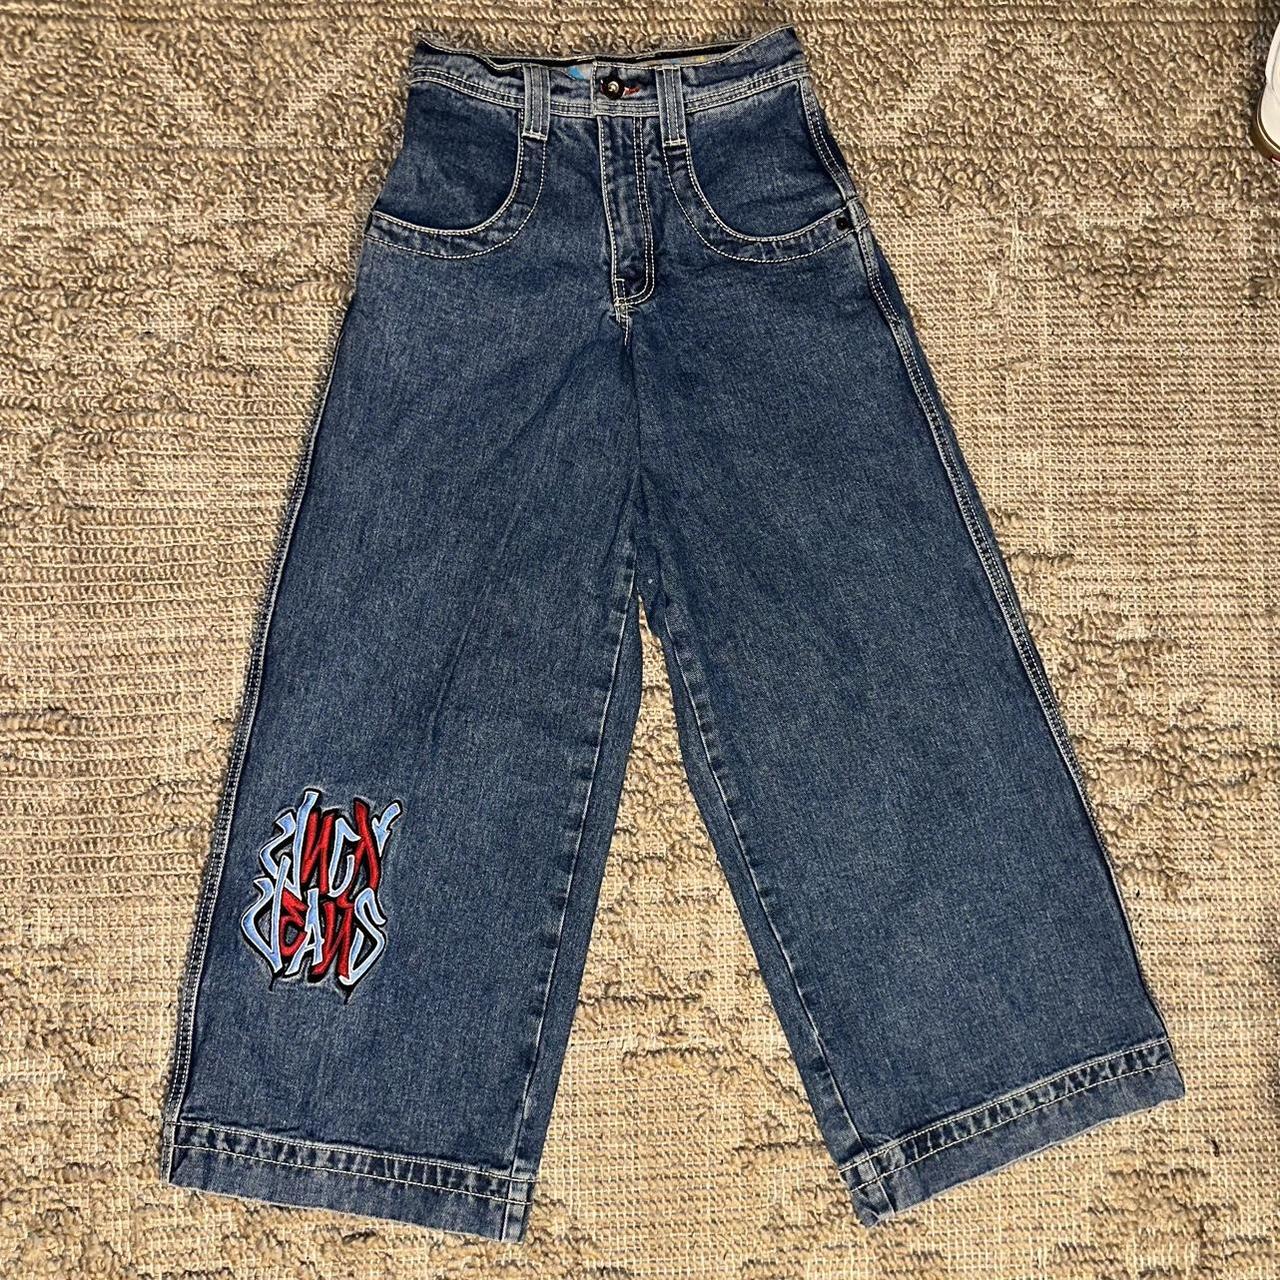 JNCO Rollin’ Dark Stone JEANS 👖 Size: 26’ SOLD OUT... - Depop